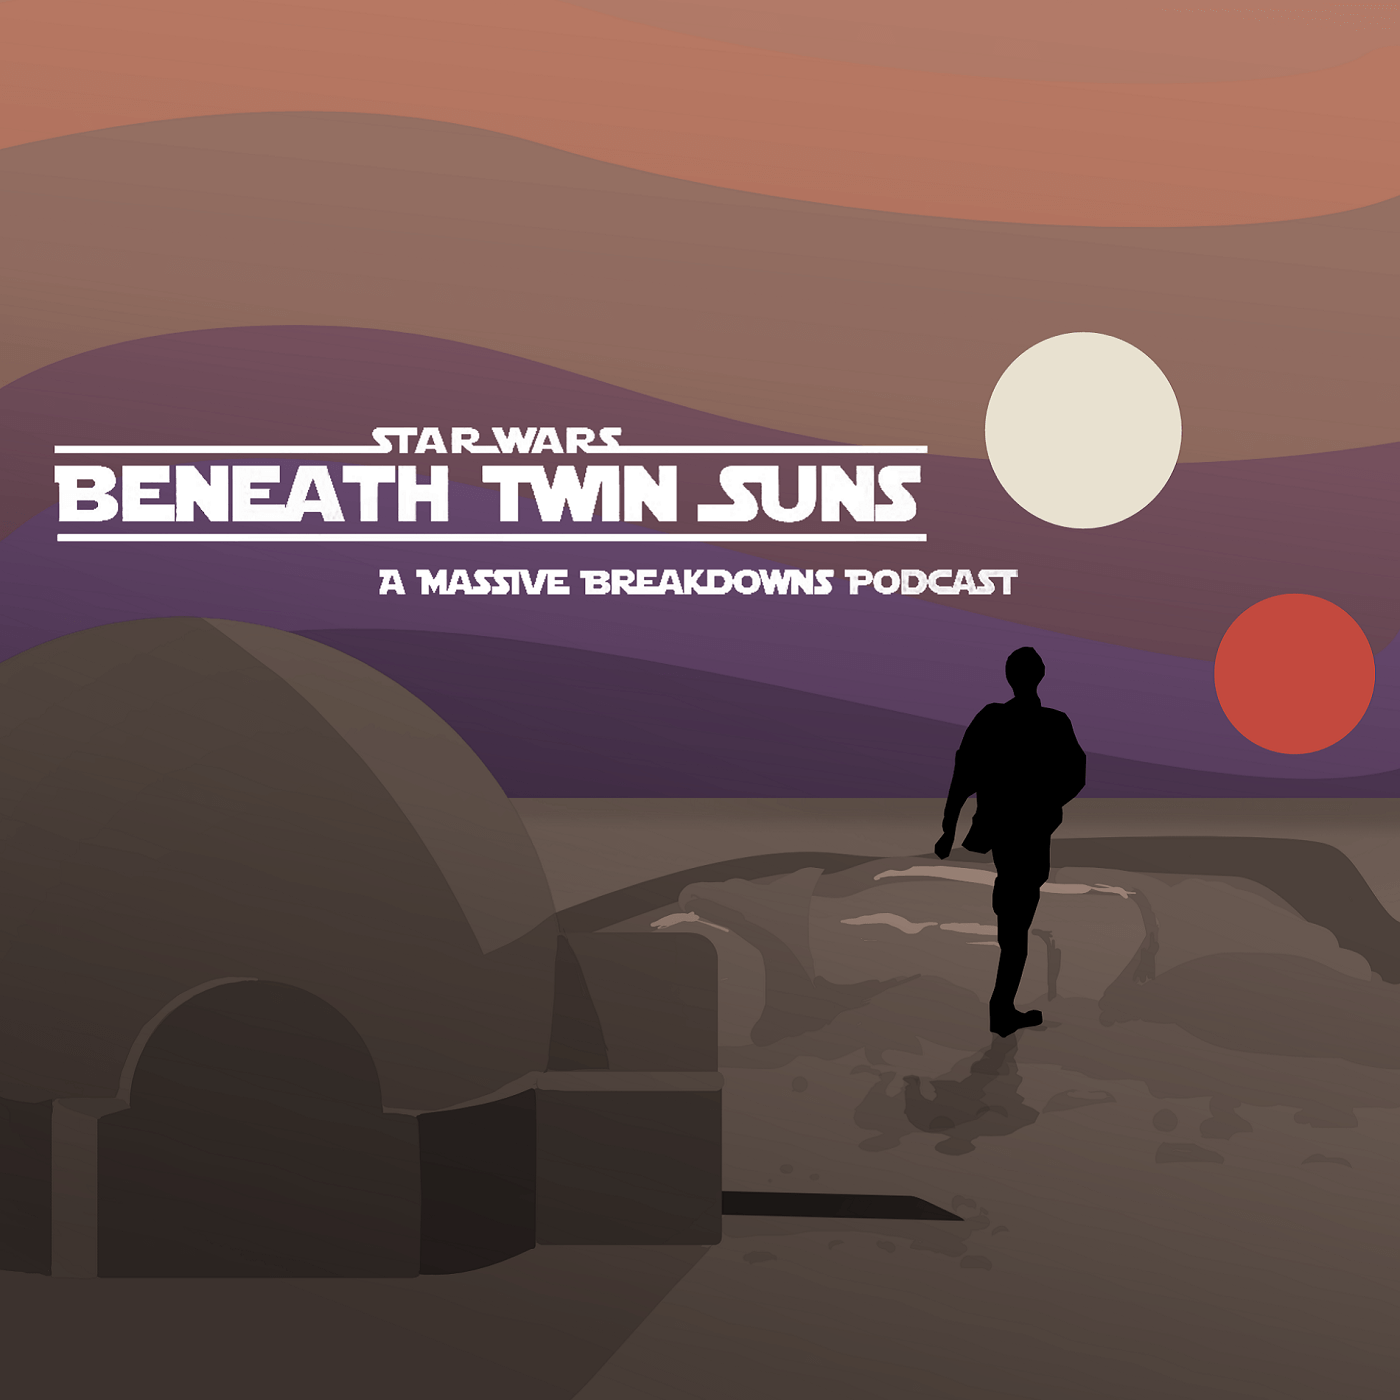 Artwork for Beneath Twin Suns: A Star Wars Podcast